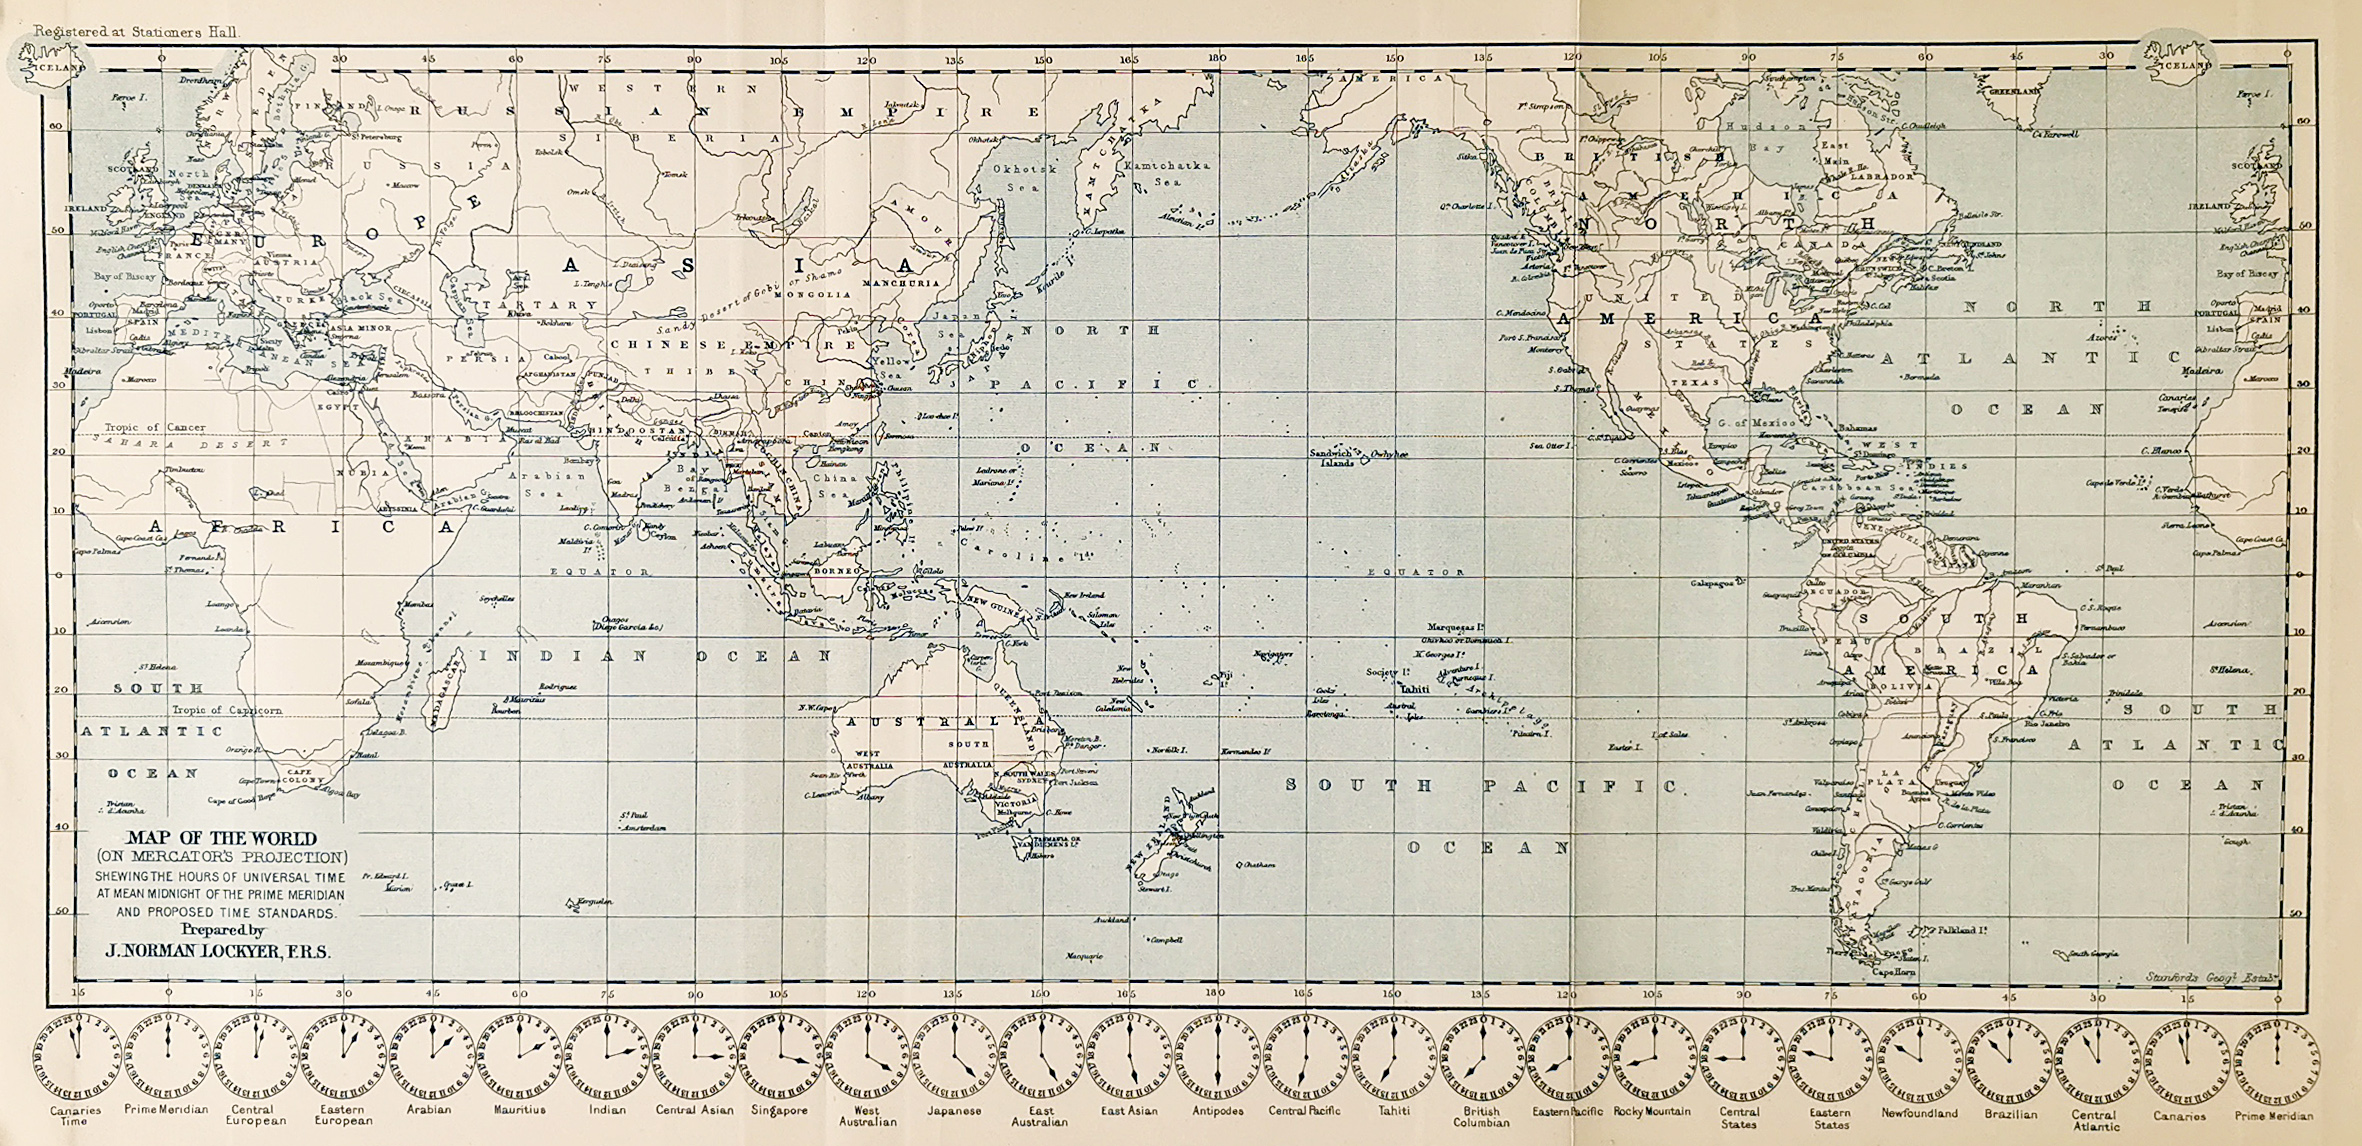 Map of the World (on Mercator's Projection) Shewing the Hours of Universal Time at Mean Midnight of the Prime Meridian - Antique Print from 1893